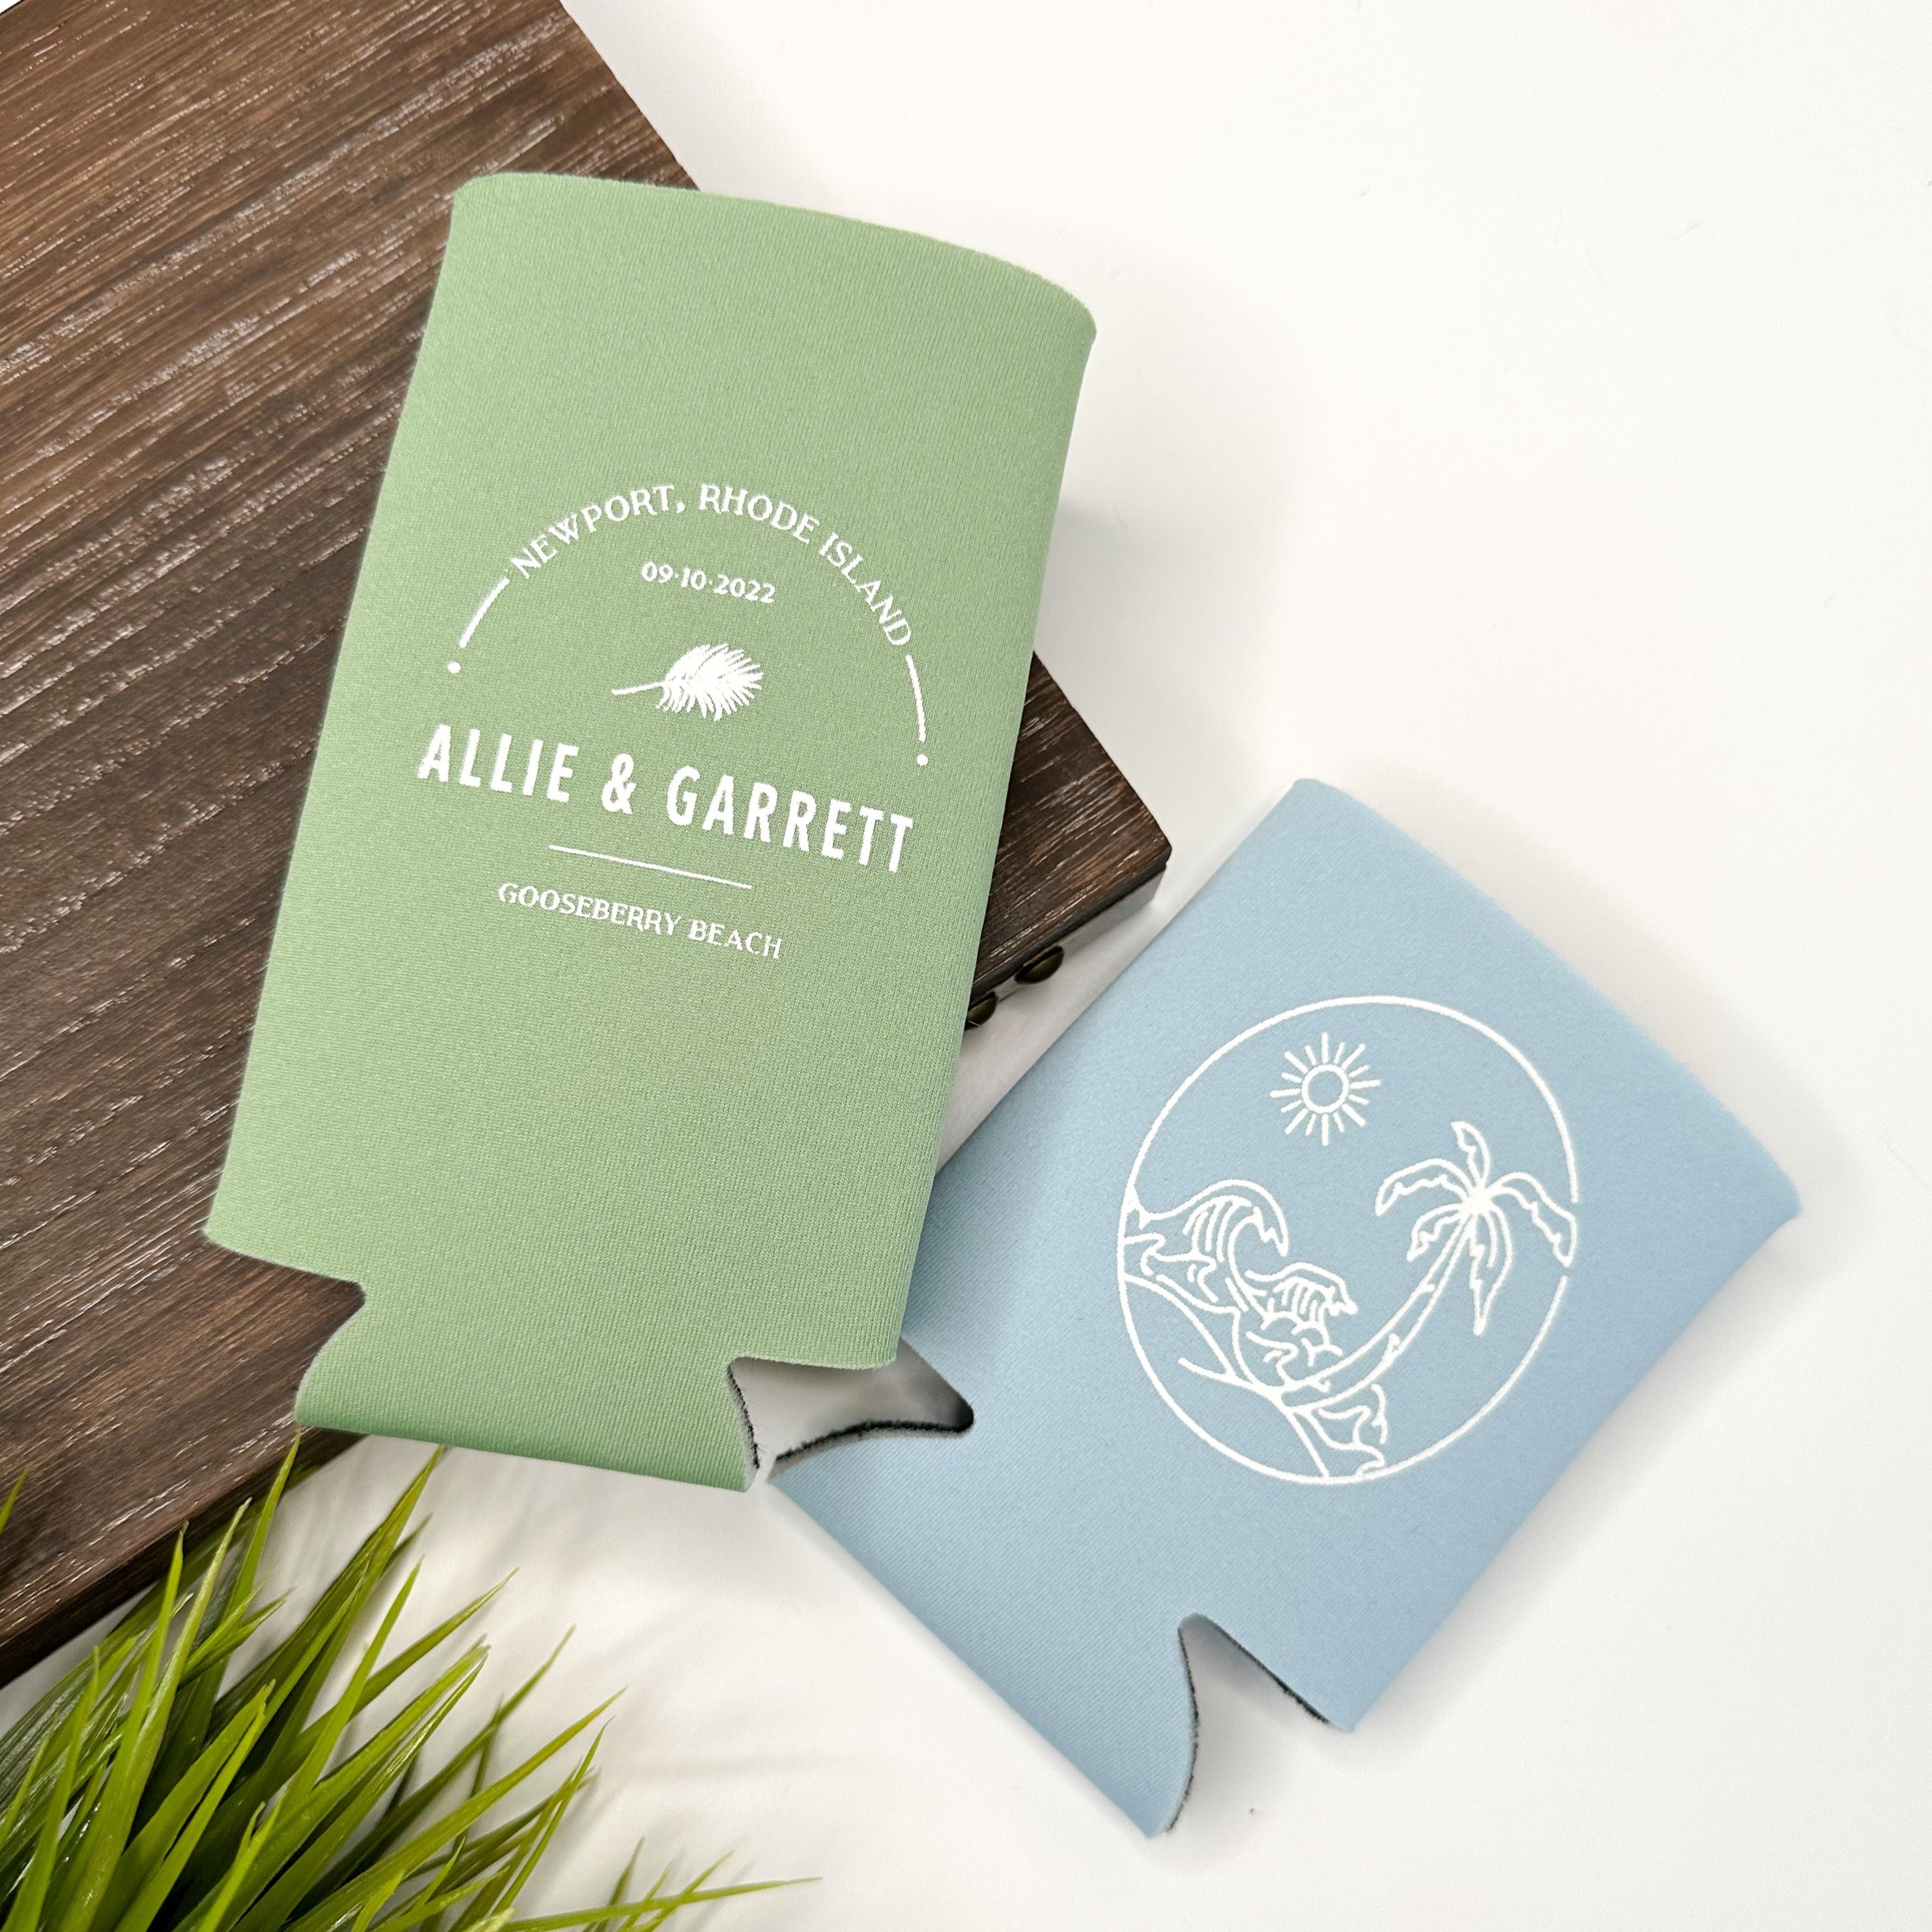 Tropical destination wedding can coolers in colors sage green and placid blue